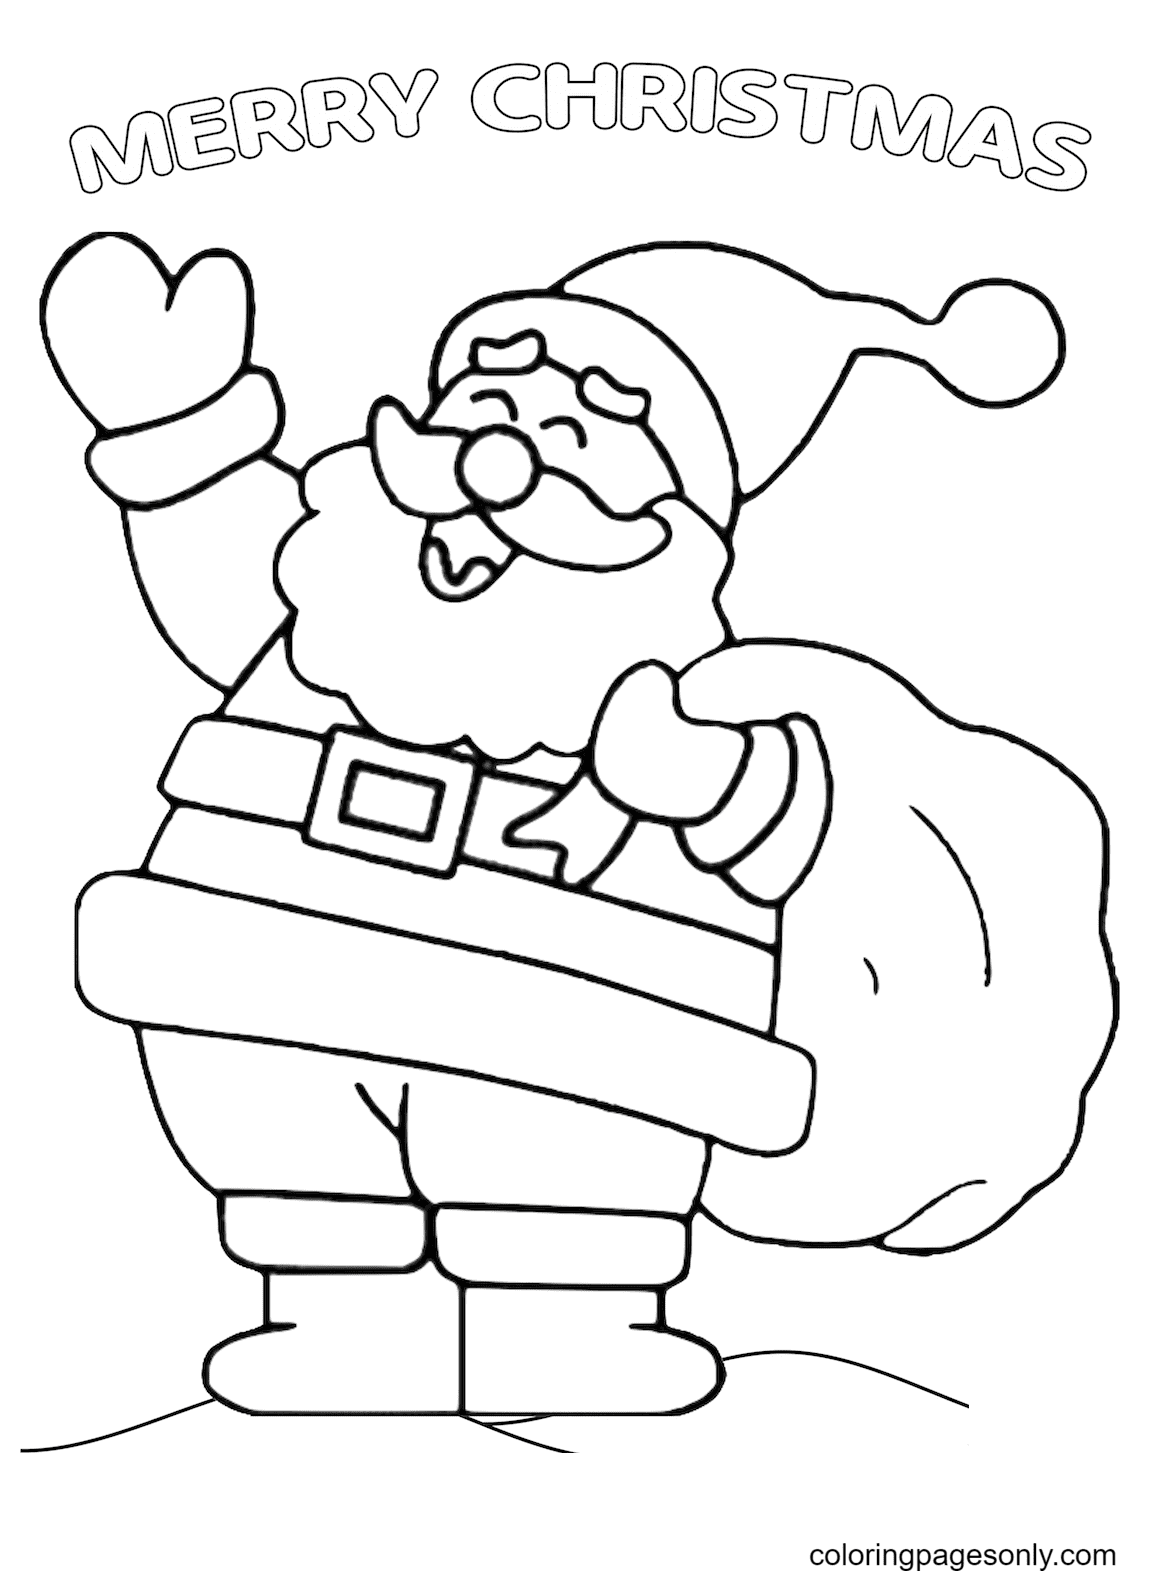 Kind and Awesome Santa Claus Coloring Page